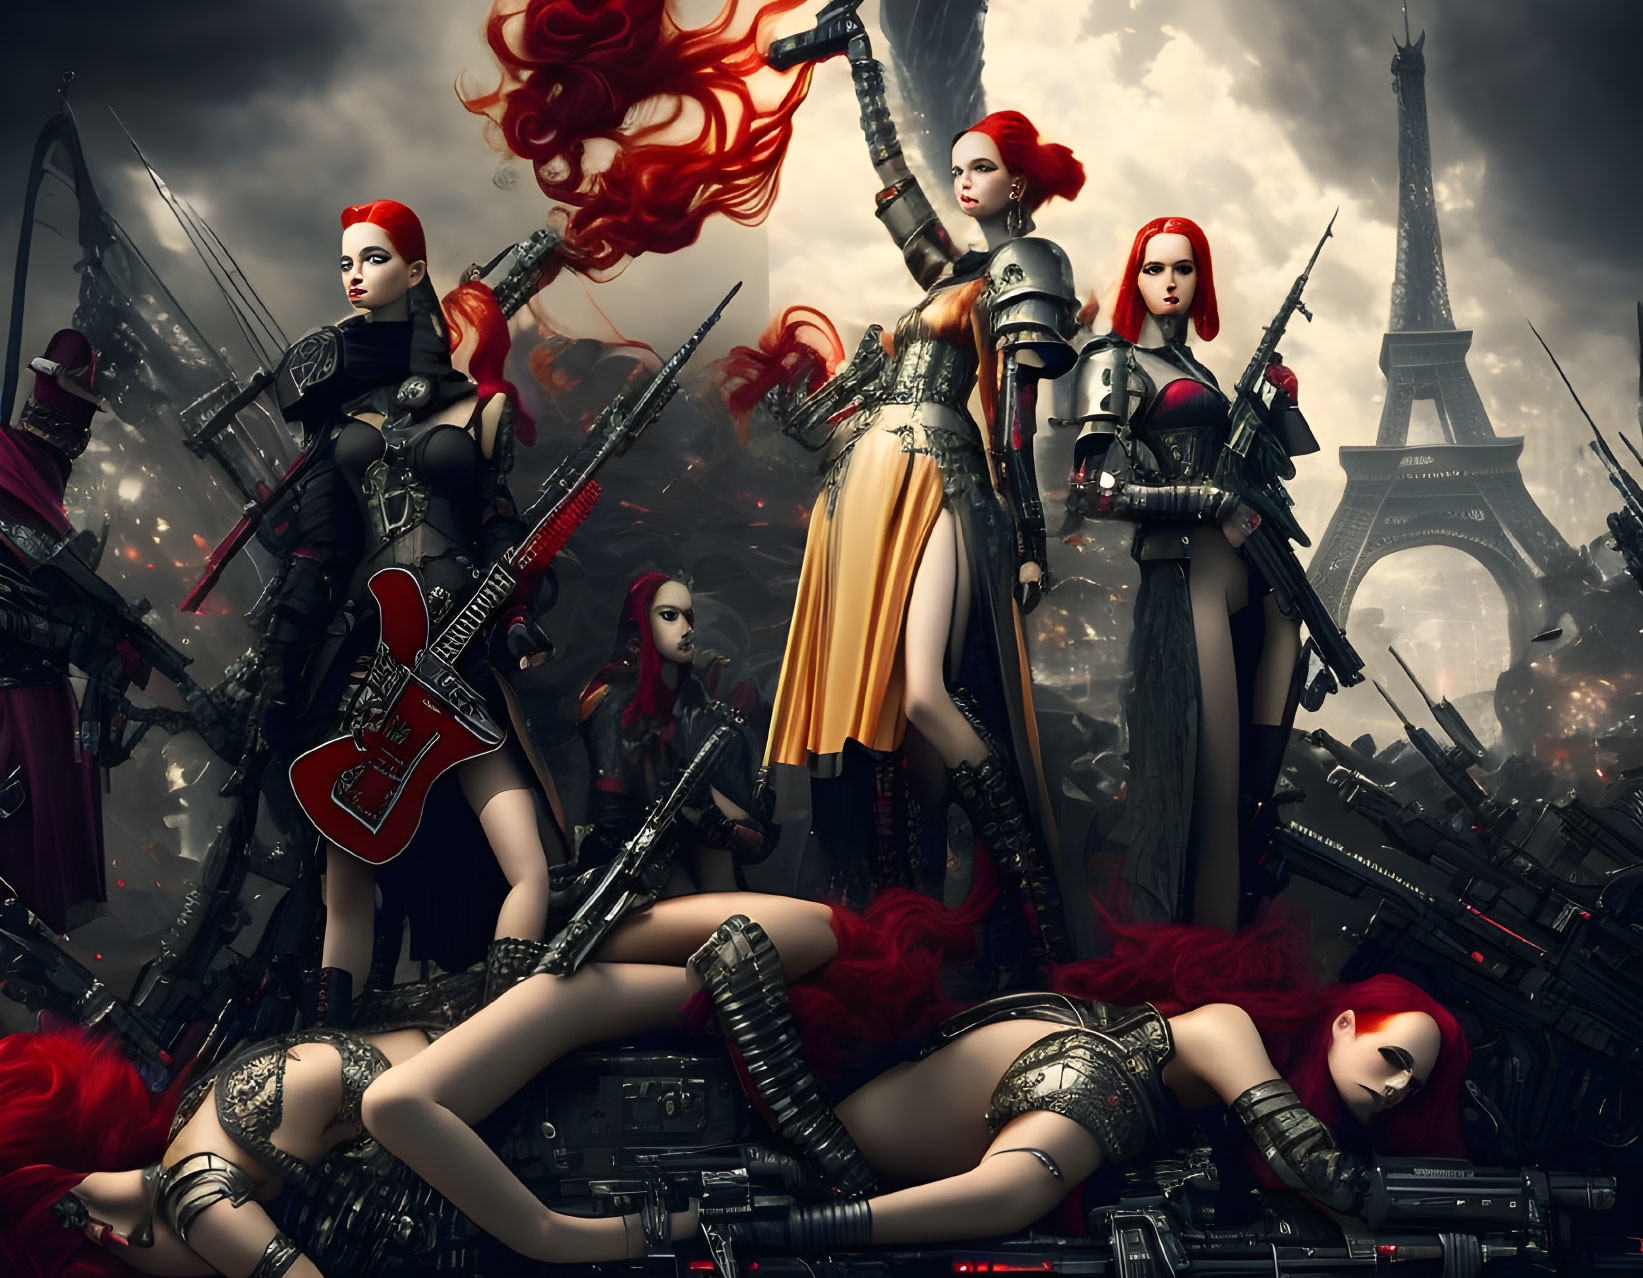 Fantasy image of red-haired female warriors in armor with weapons, set against Eiffel Tower and